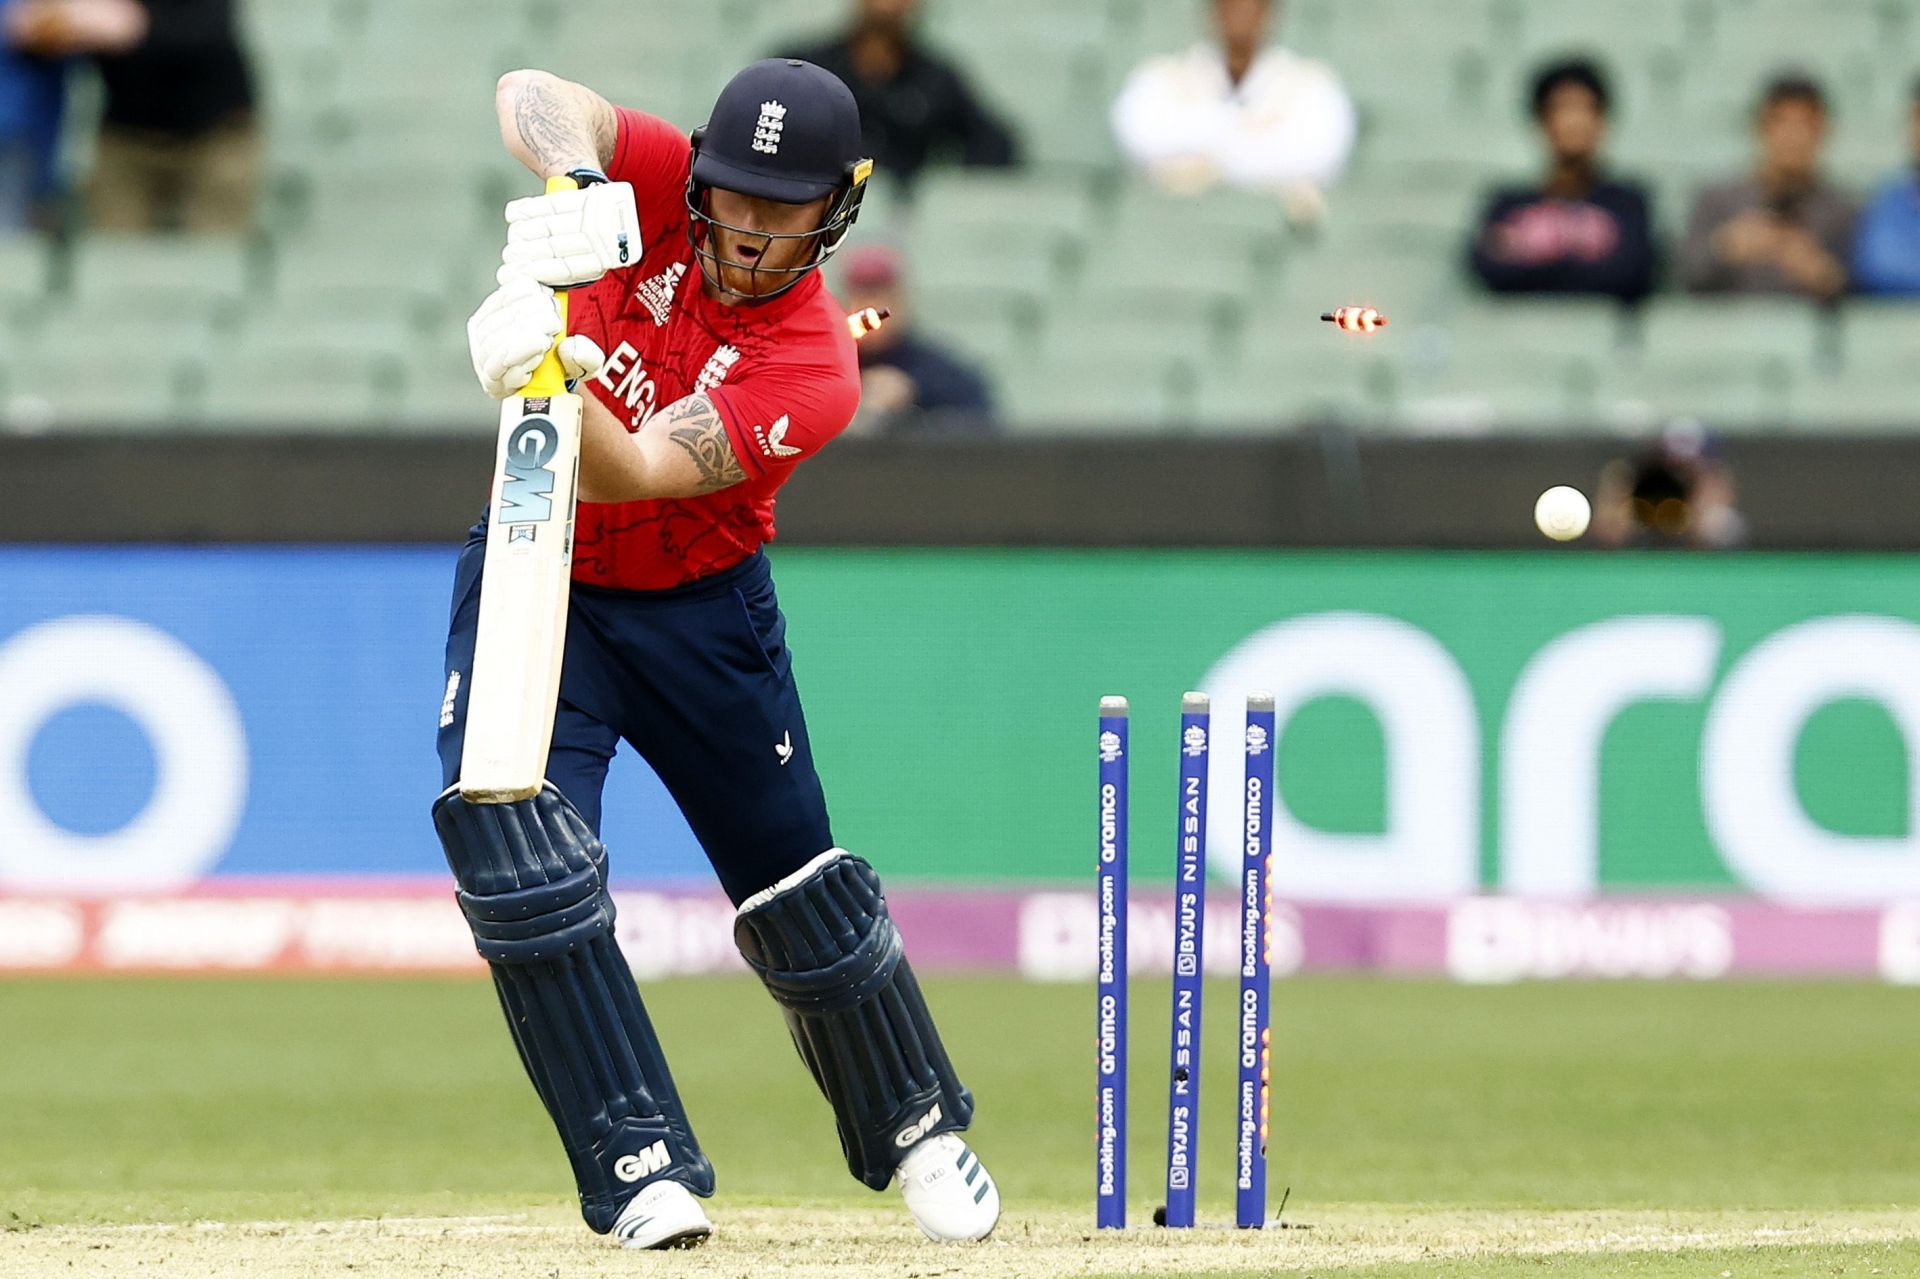 England lost their first three wickets for just 29 runs.